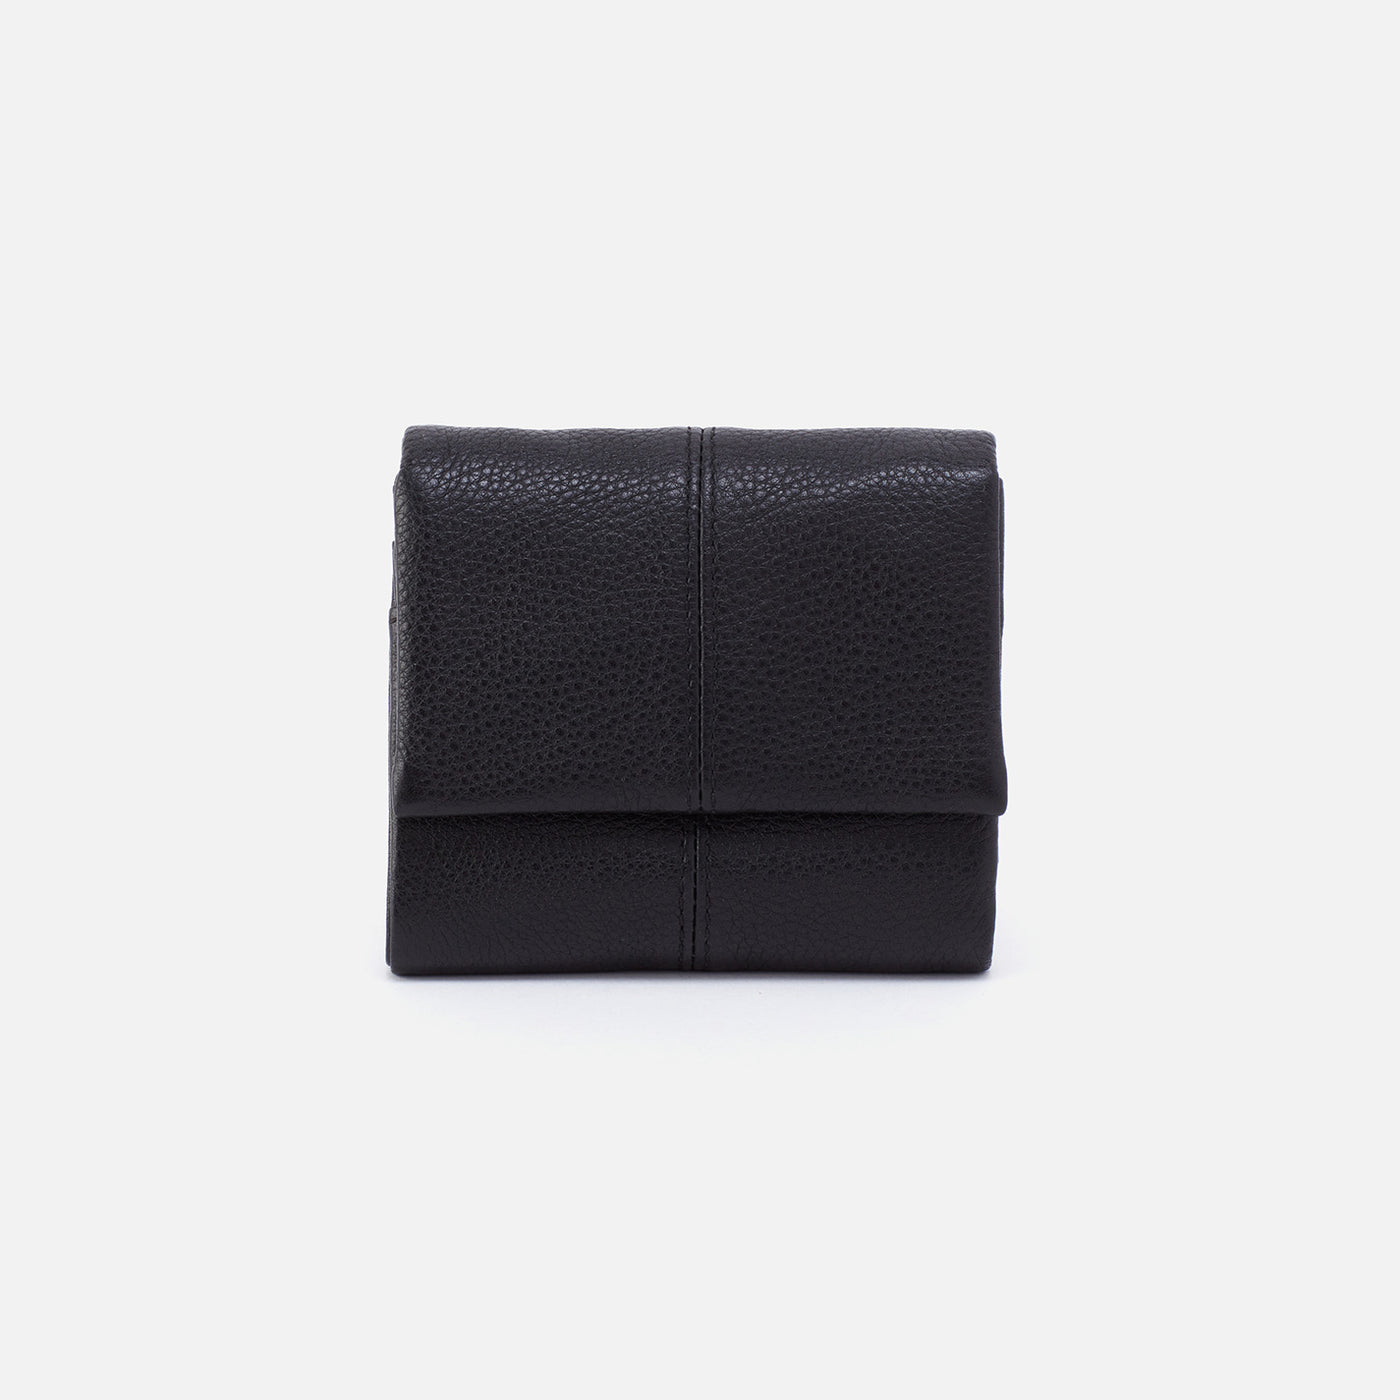 Keen Mini Trifold Compact Wallet in Pebbled Leather - Black